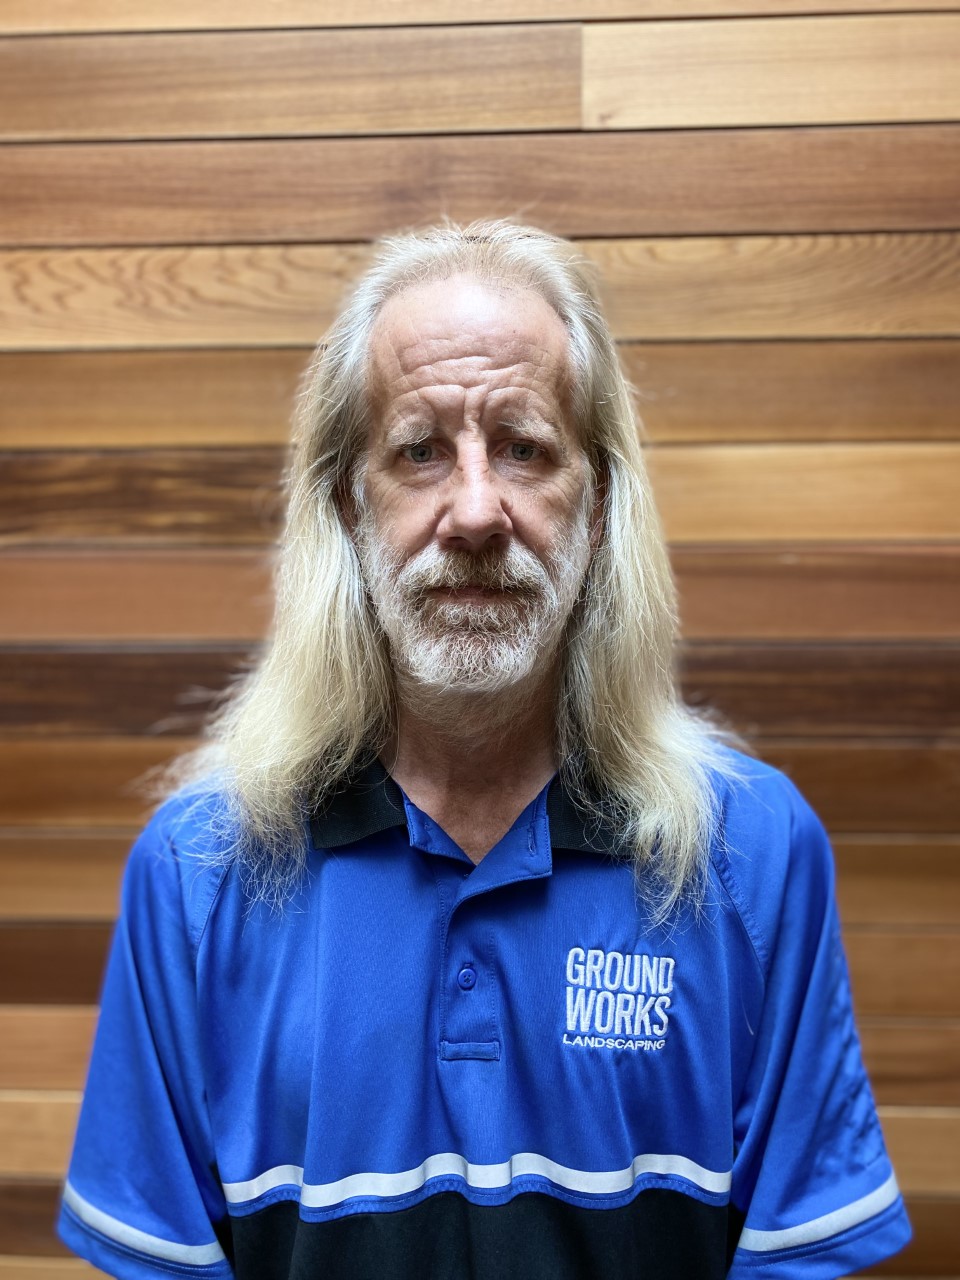 Photo of a man with gray blonde hair and Ground Works polo, looking at the camera.